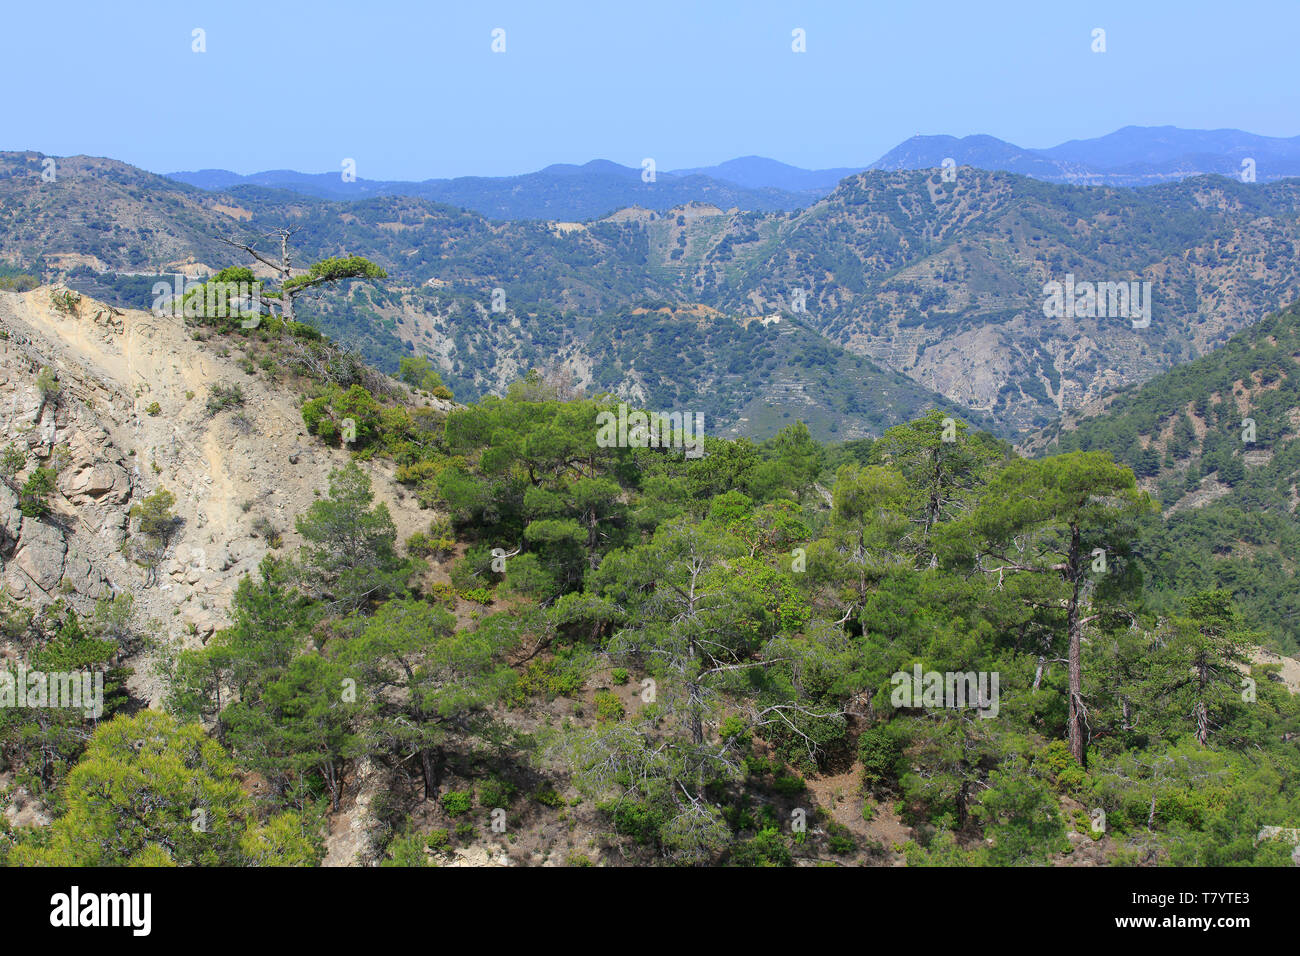 Panoramic view across Mount Olympus and the Troodos Mountains in Cyprus Stock Photo